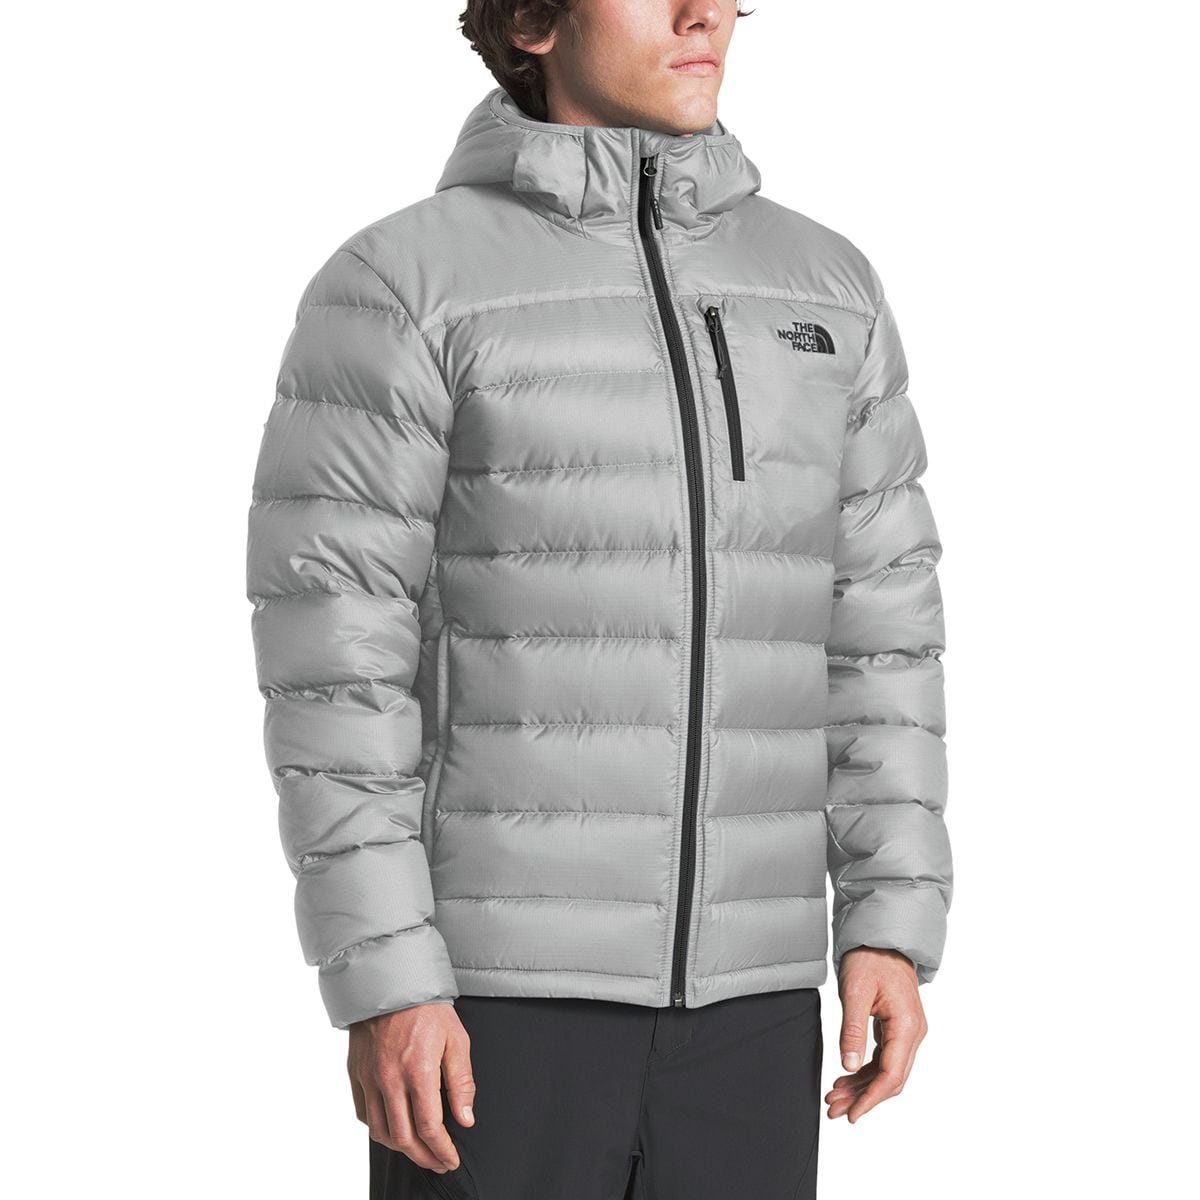 The North Face Aconcagua Hooded Jacket 